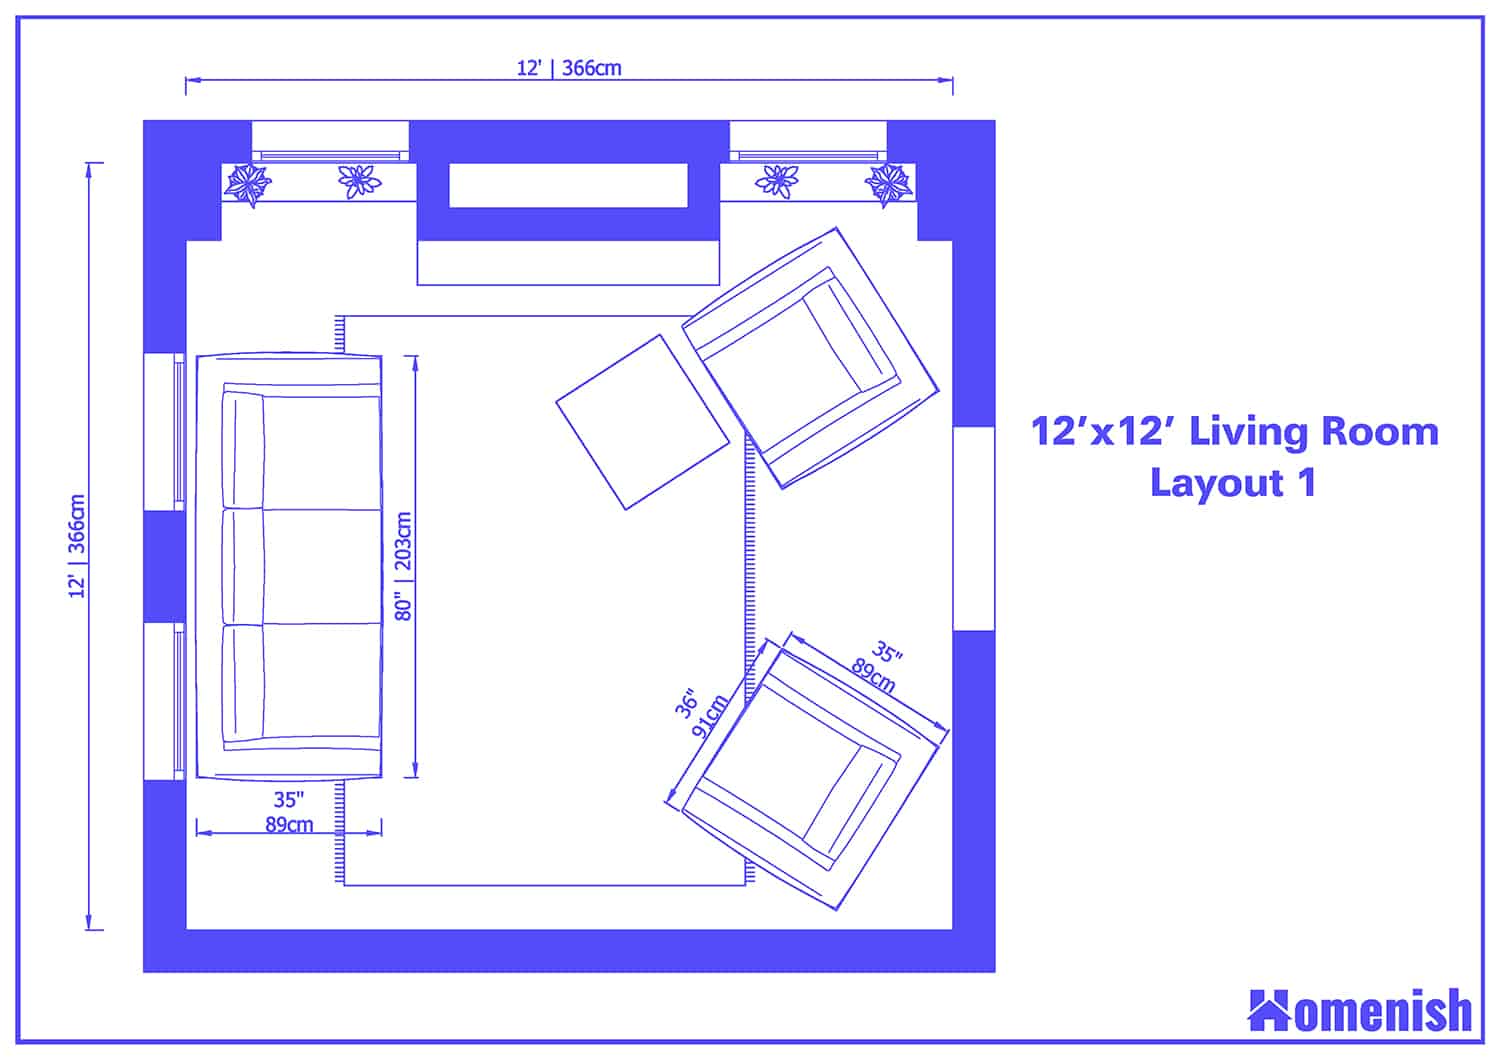 11 X 12 Living Room Layout